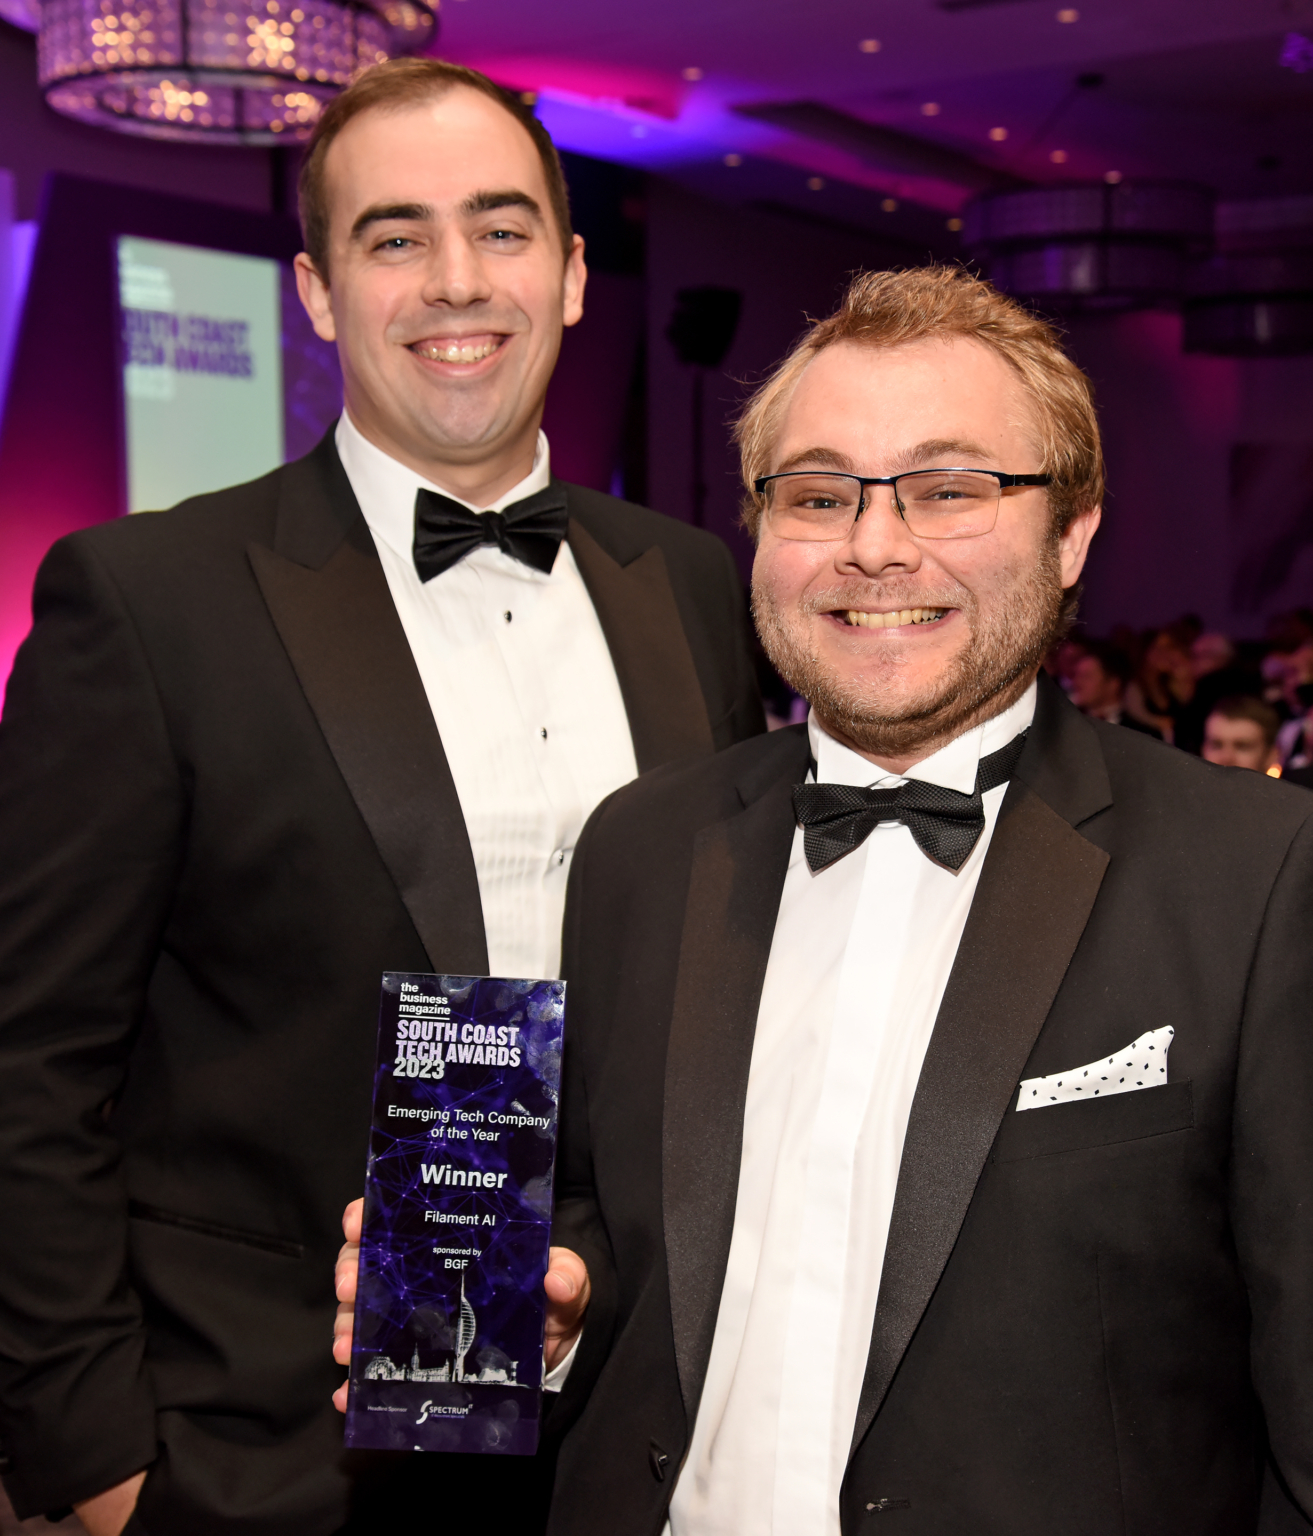 James Ravenscroft and Alex Horsfield of Filament AI, winners of Emerging Tech Company of the Year